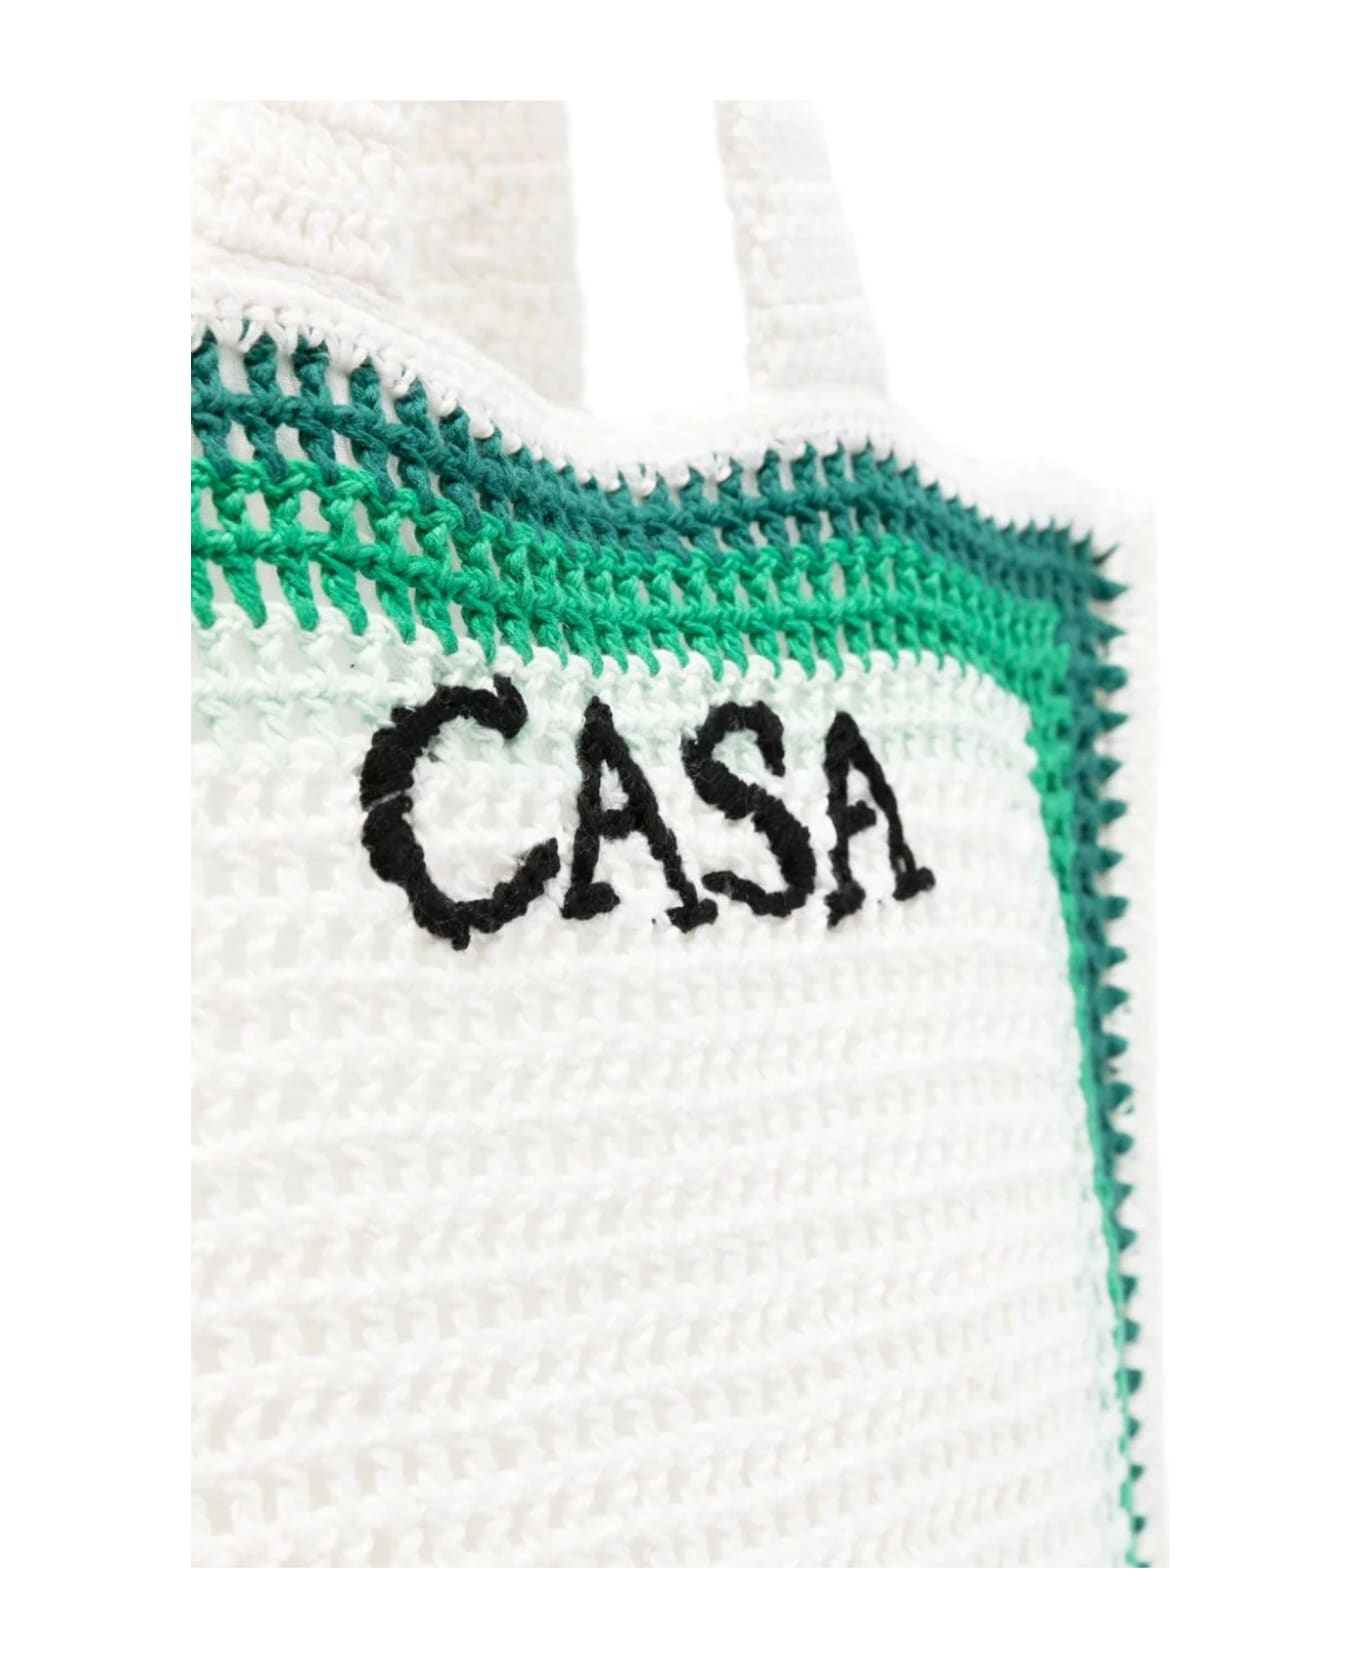 Casablanca Crocheted Tennis Tote Bag In Green And White - Green トートバッグ